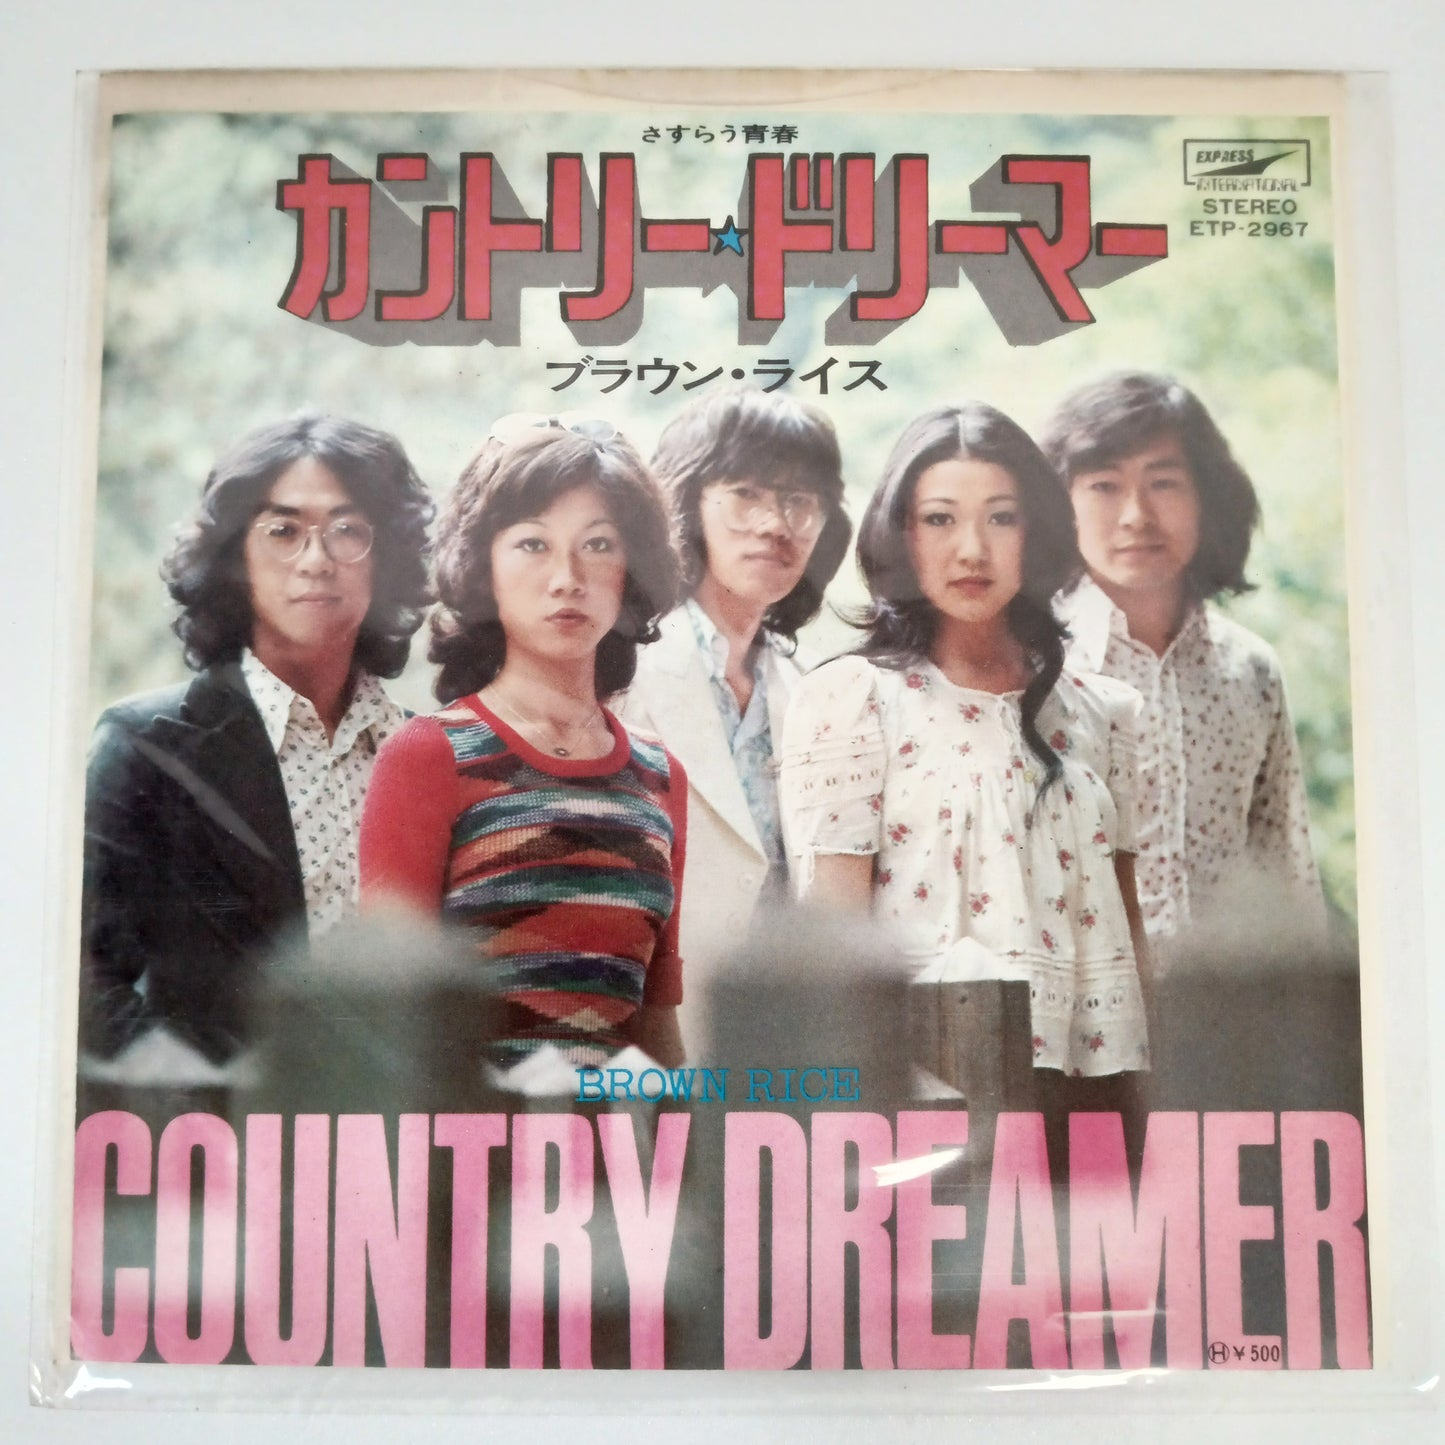 1973 Country Dreamer Brown Lewis B: COUNTRY DREAMER Japanese record vintage